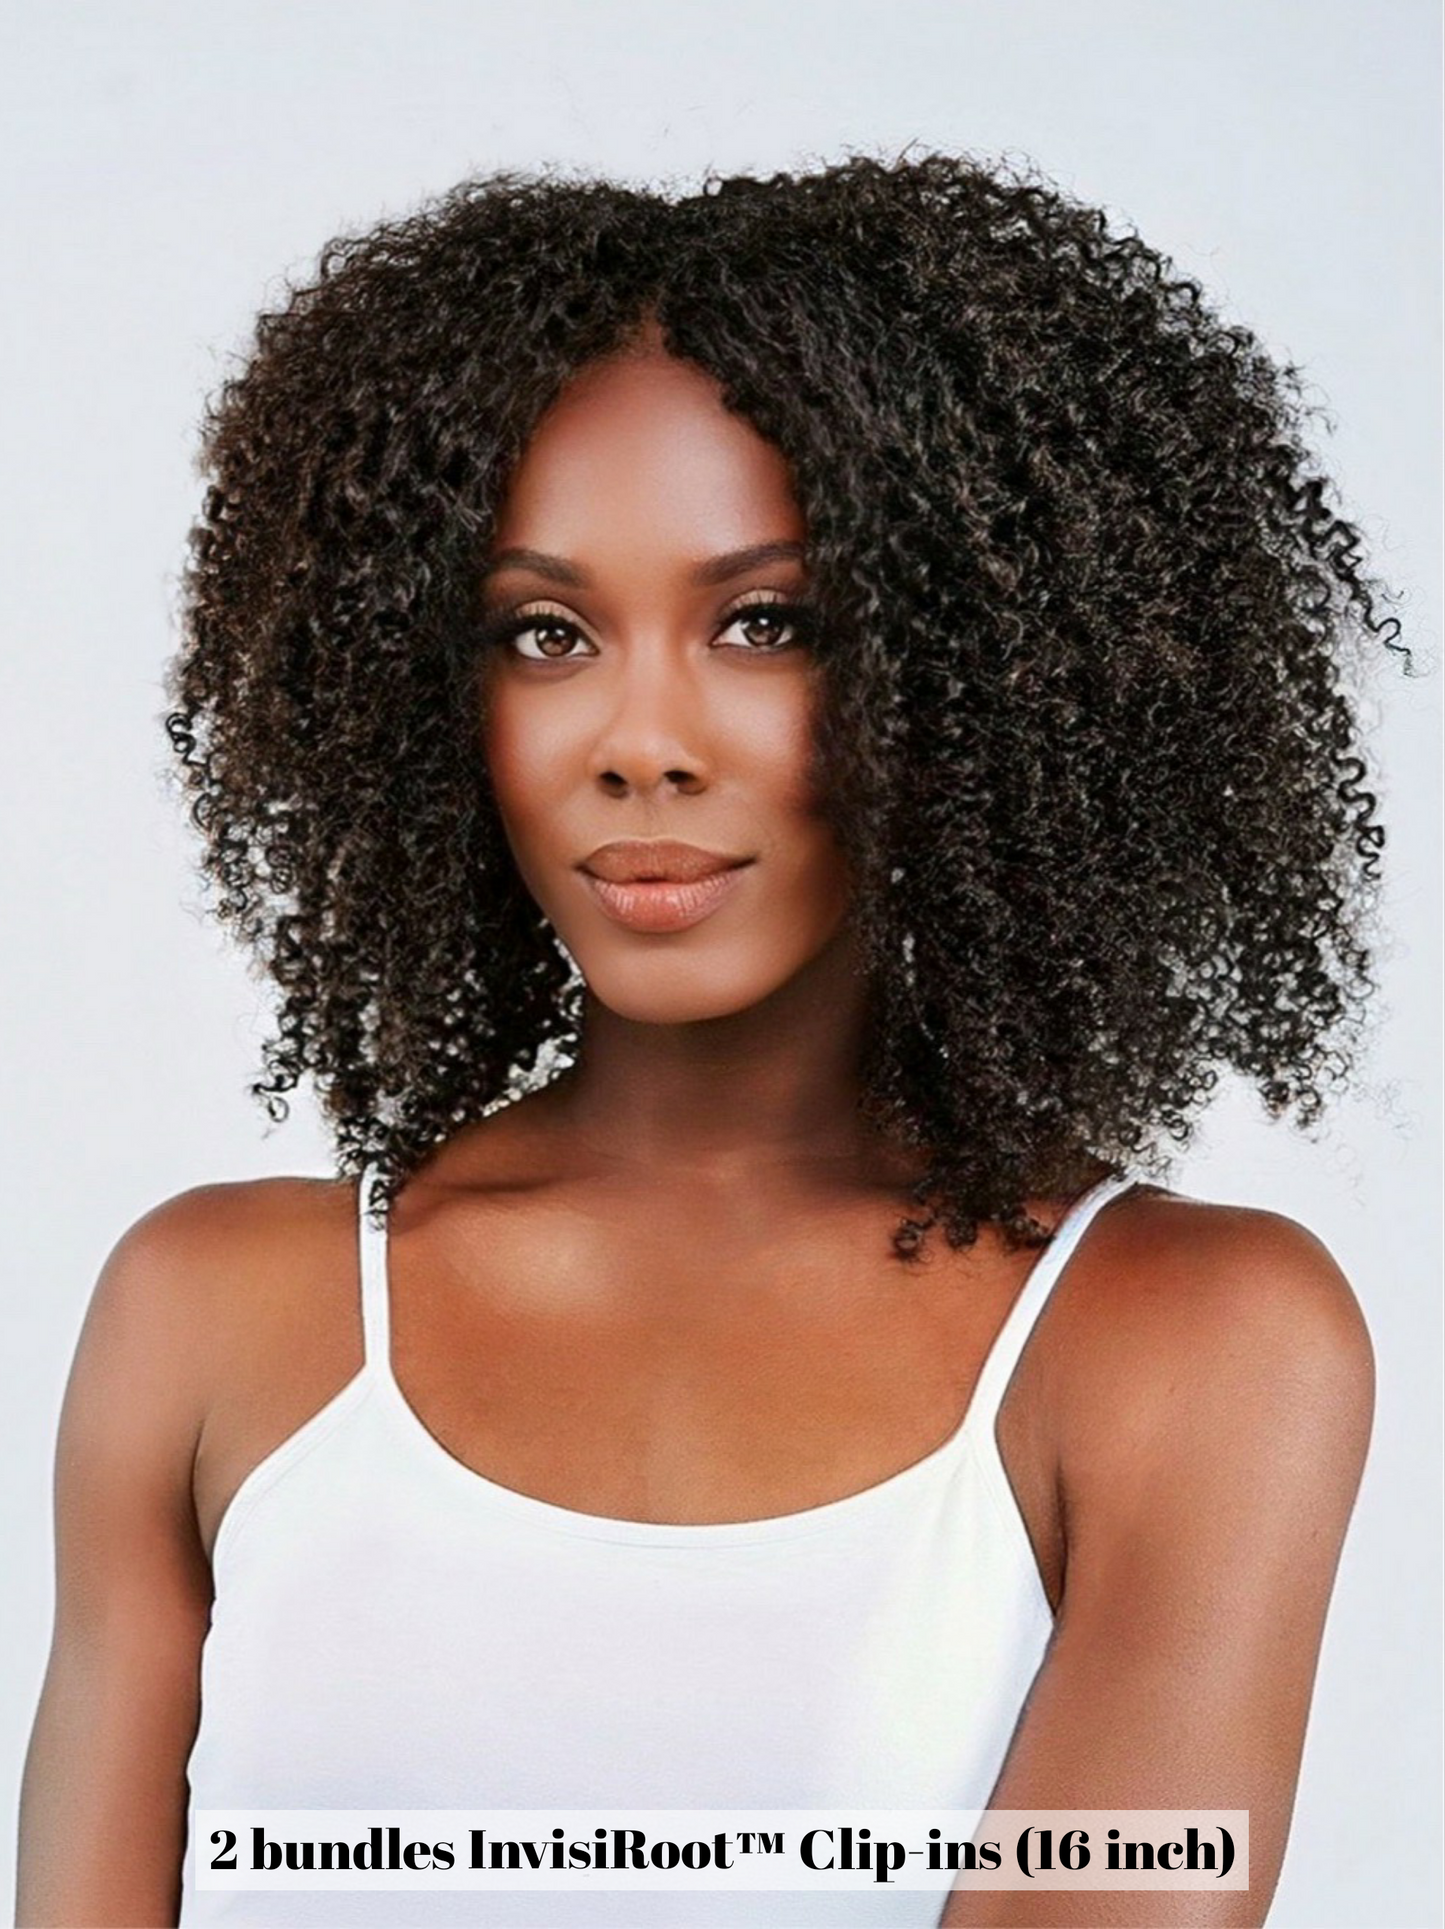 Upgrade from competitor's Follicle Fusion™ Clip-ins to our Patented InVisiRoot® Clip-ins. Experience True Undetectable Results: This is Nicole Burmese 4A Kinky Curly texture  InVisiRoot® Clip-ins